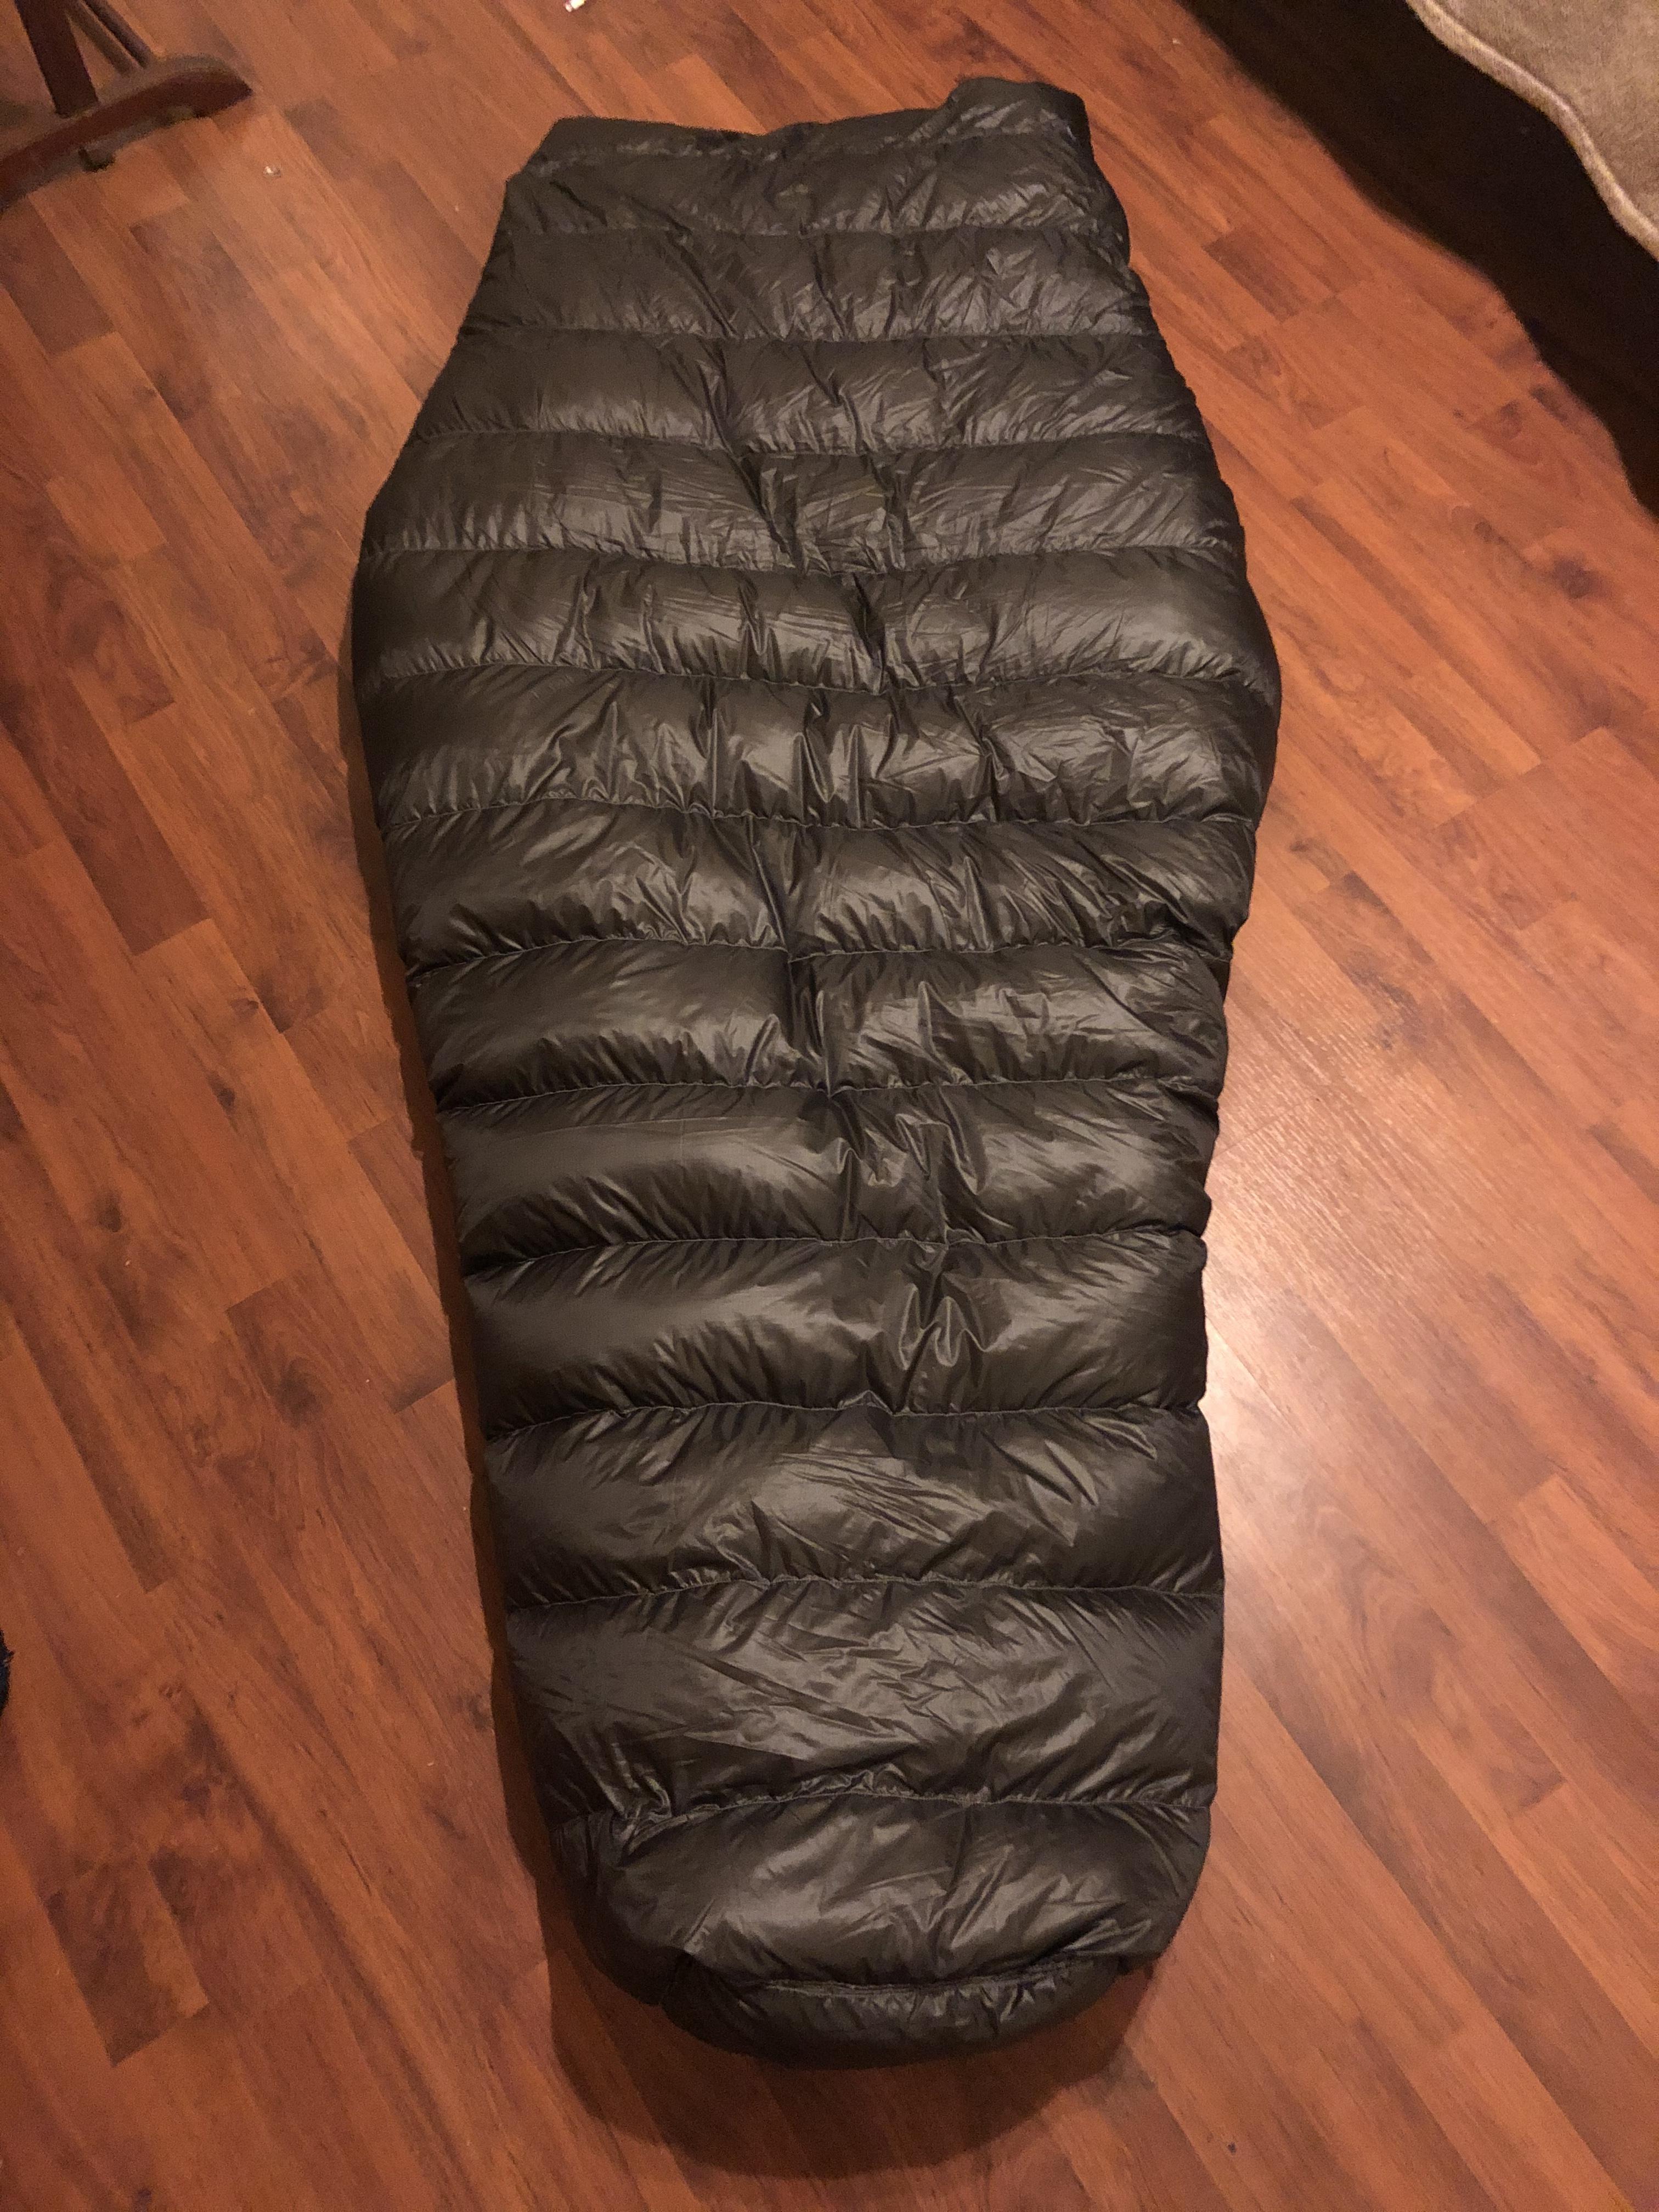 My MYOG down quilt - I did it! - Backpacking Light